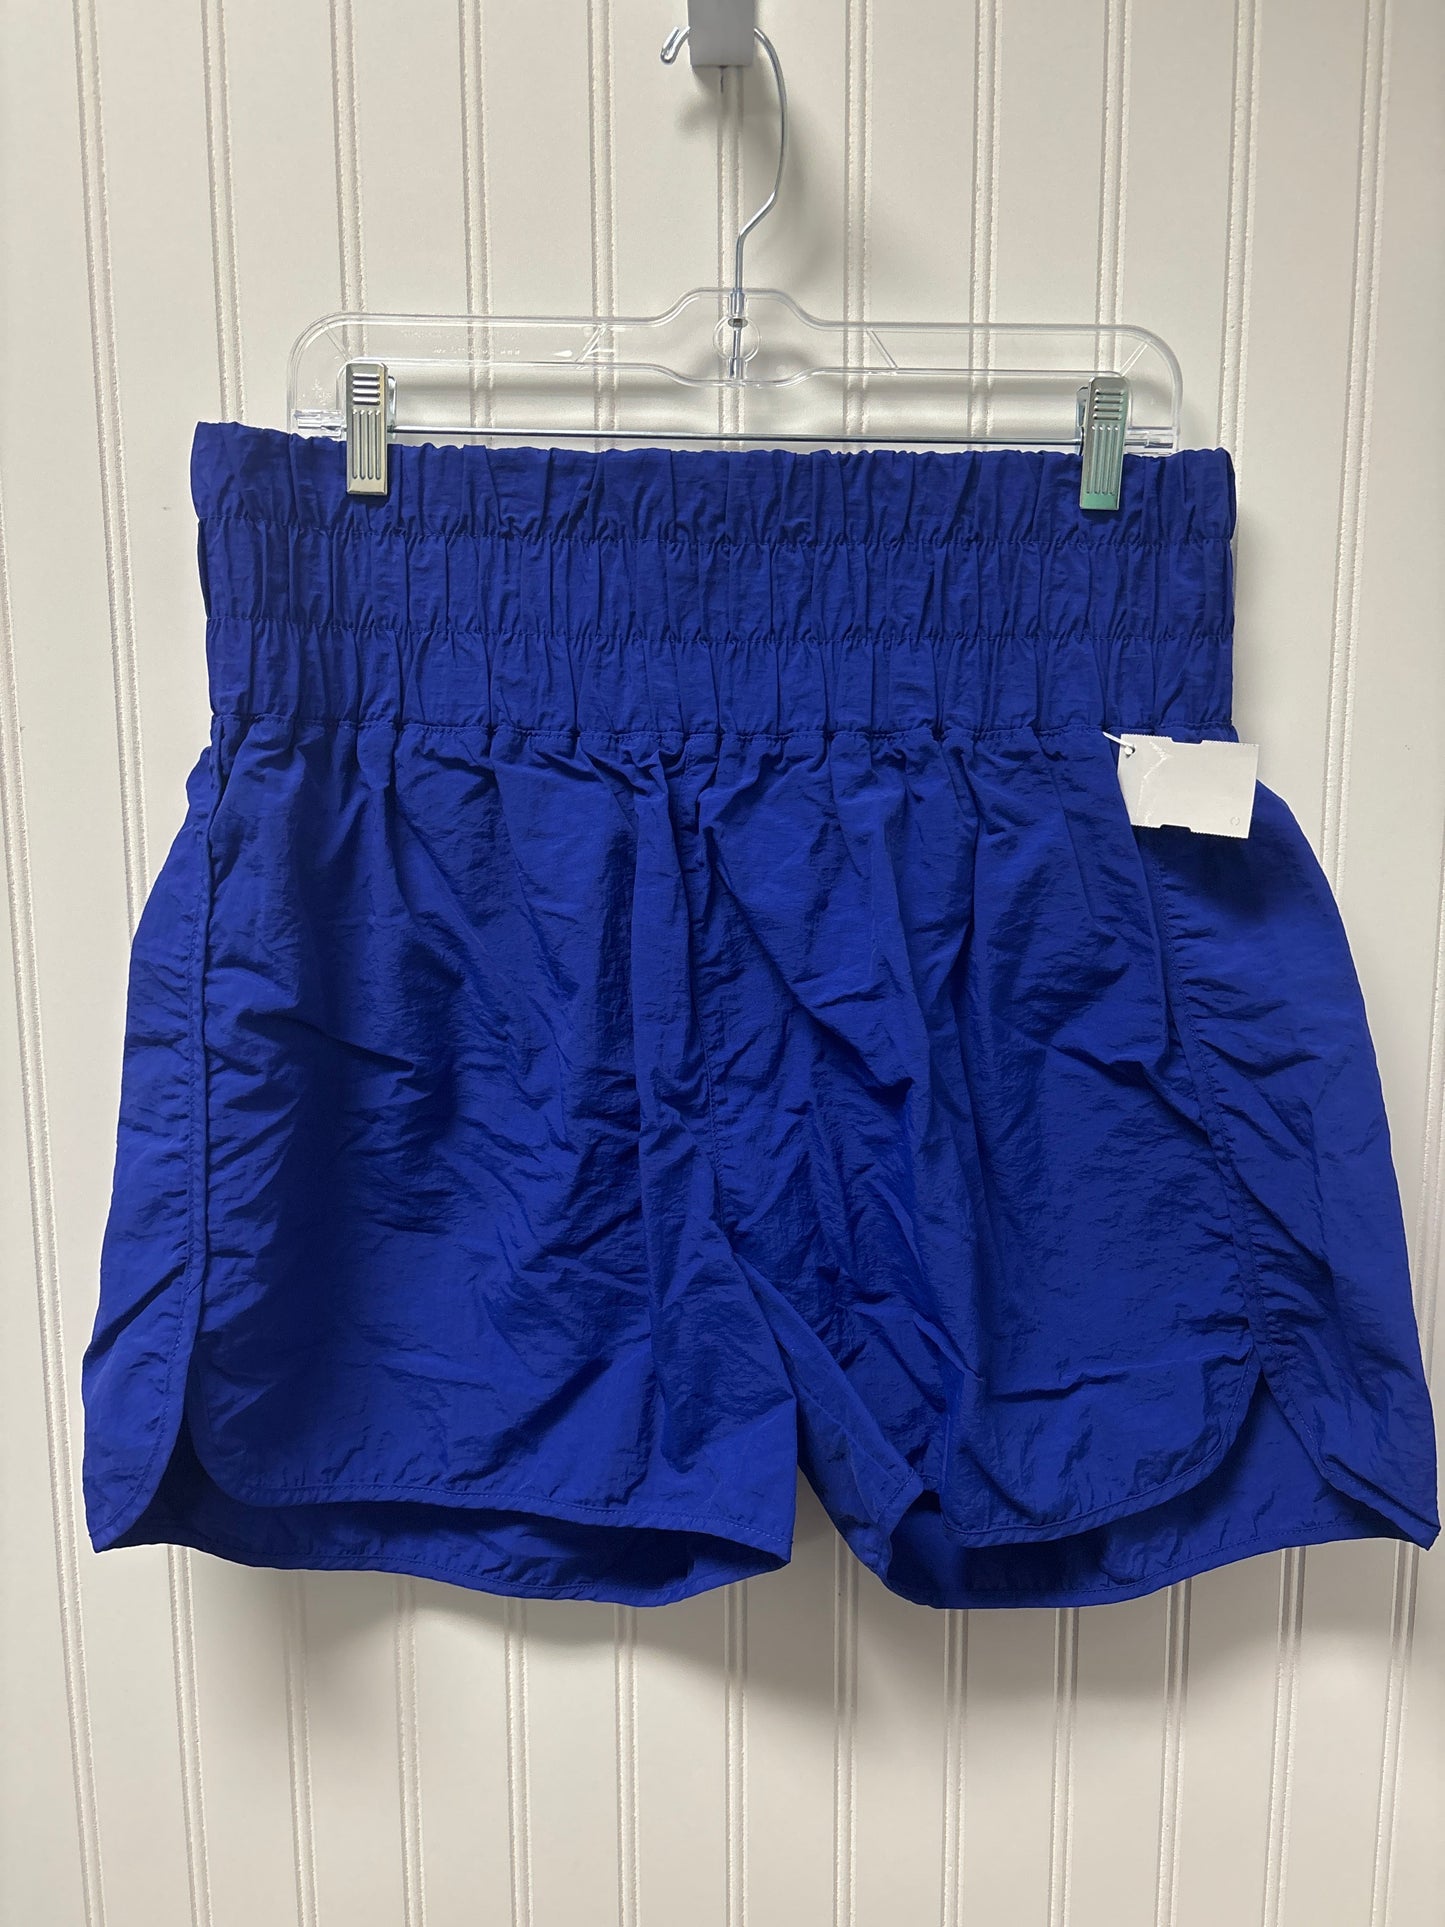 Blue Athletic Shorts Zenana Outfitters, Size 1x